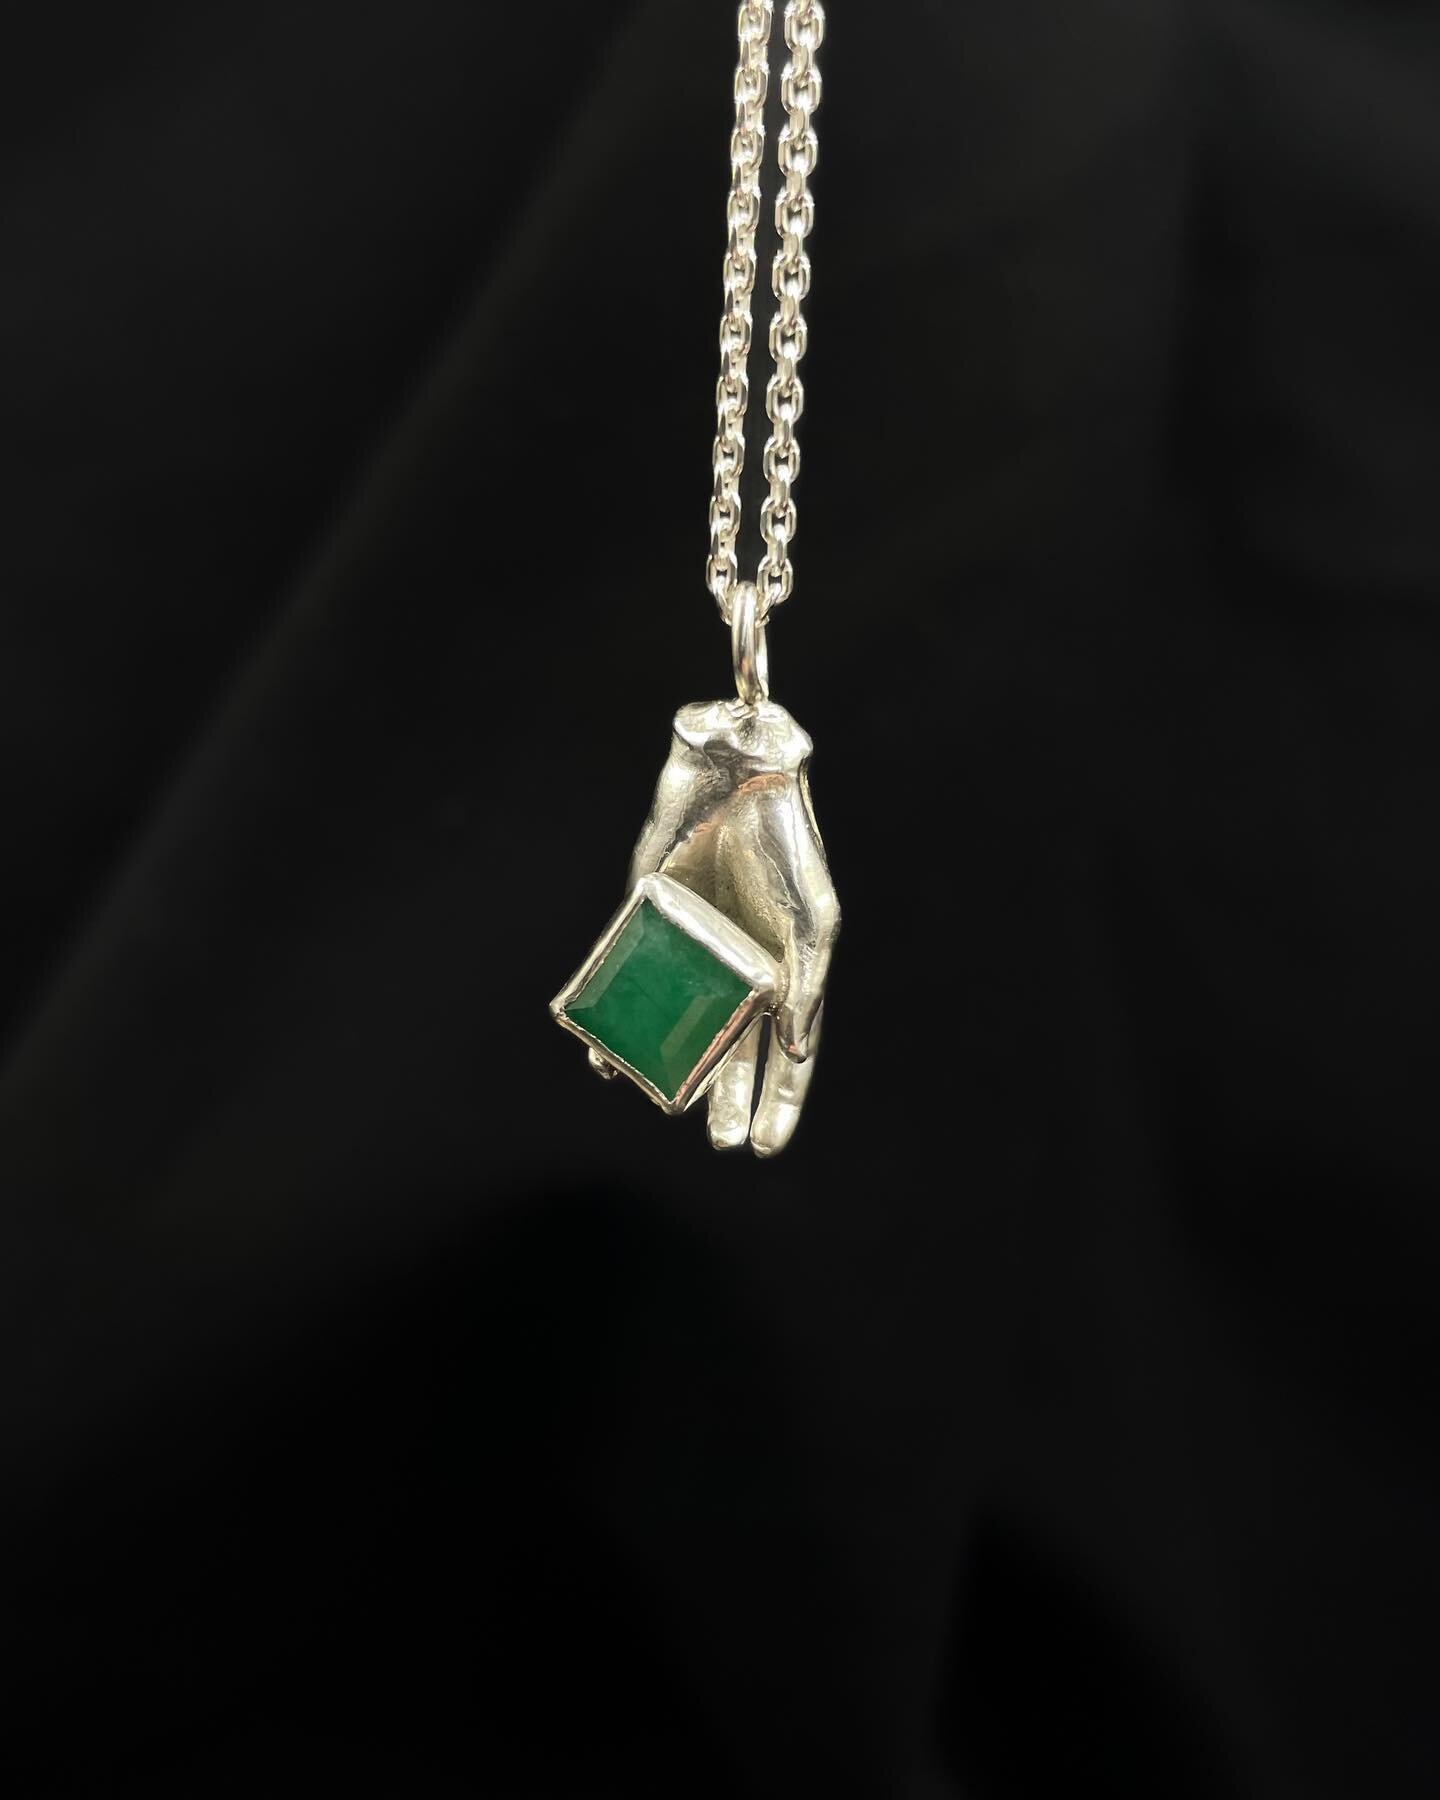 Swipe-&gt; Silver Hands Emerald Necklace. Please tap the image to view the product tags, and tap a product tag to checkout on my website. 

This necklace features an emerald set in fine silver, soldered to a casted silver hand.